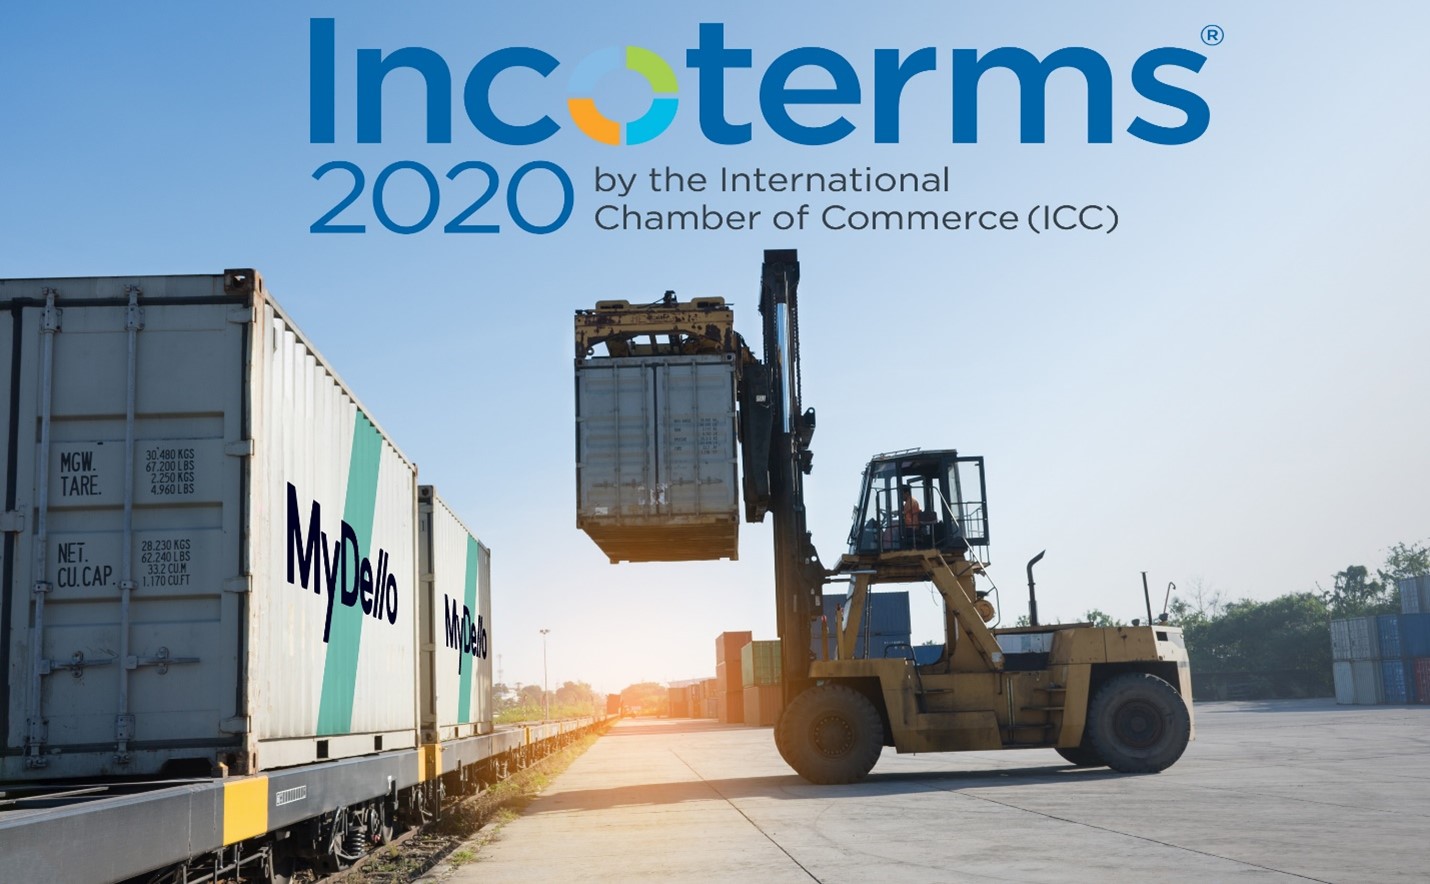 Incoterms 2020 official logo + loading containers on a train